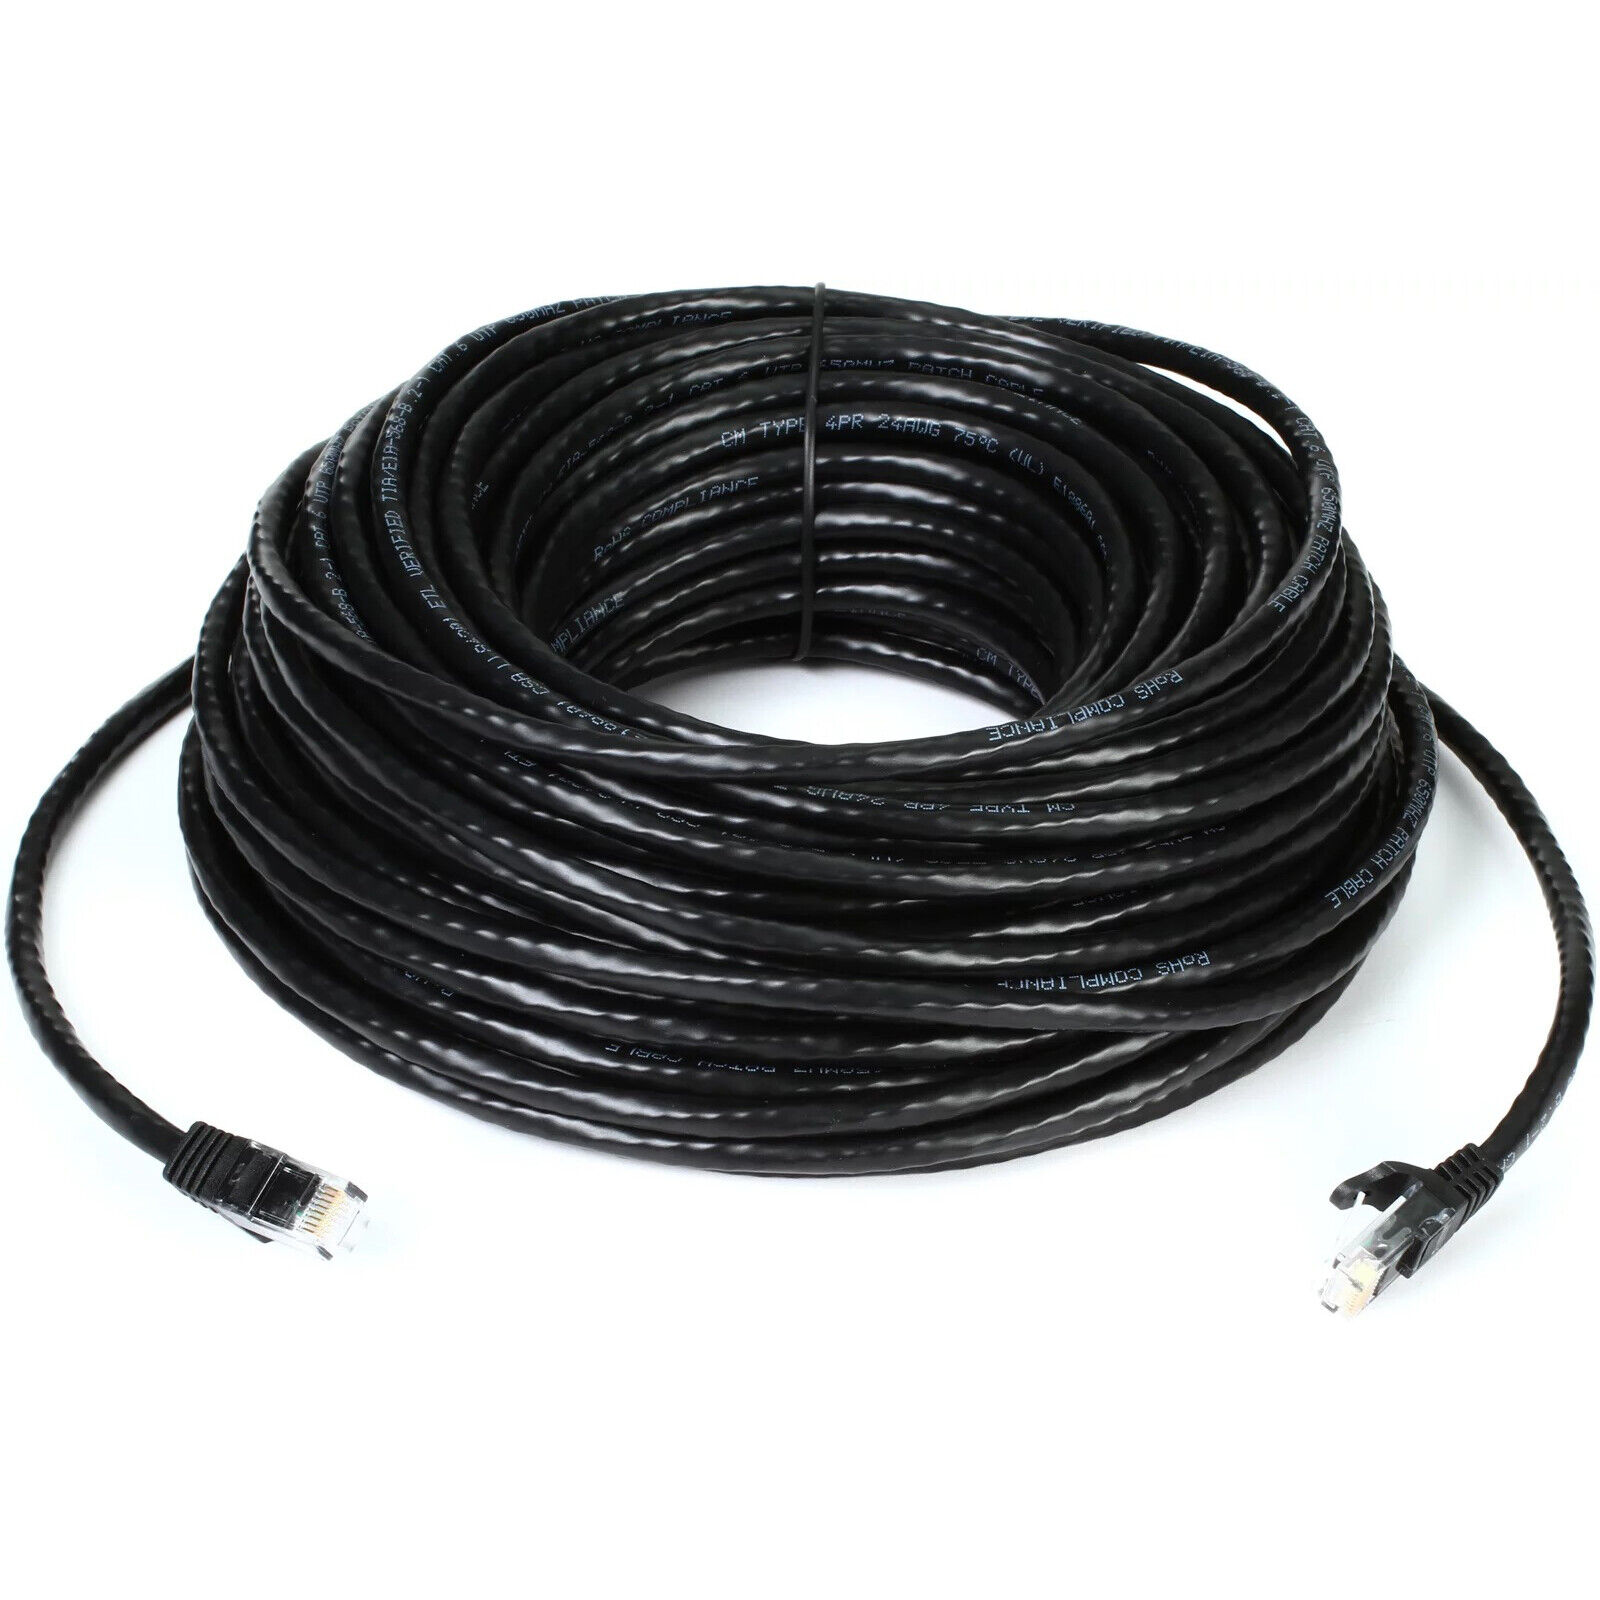 200FT Cat6 High Speed Network IP PoE Switch Ethernet Cable Waterproof RJ45 Cord